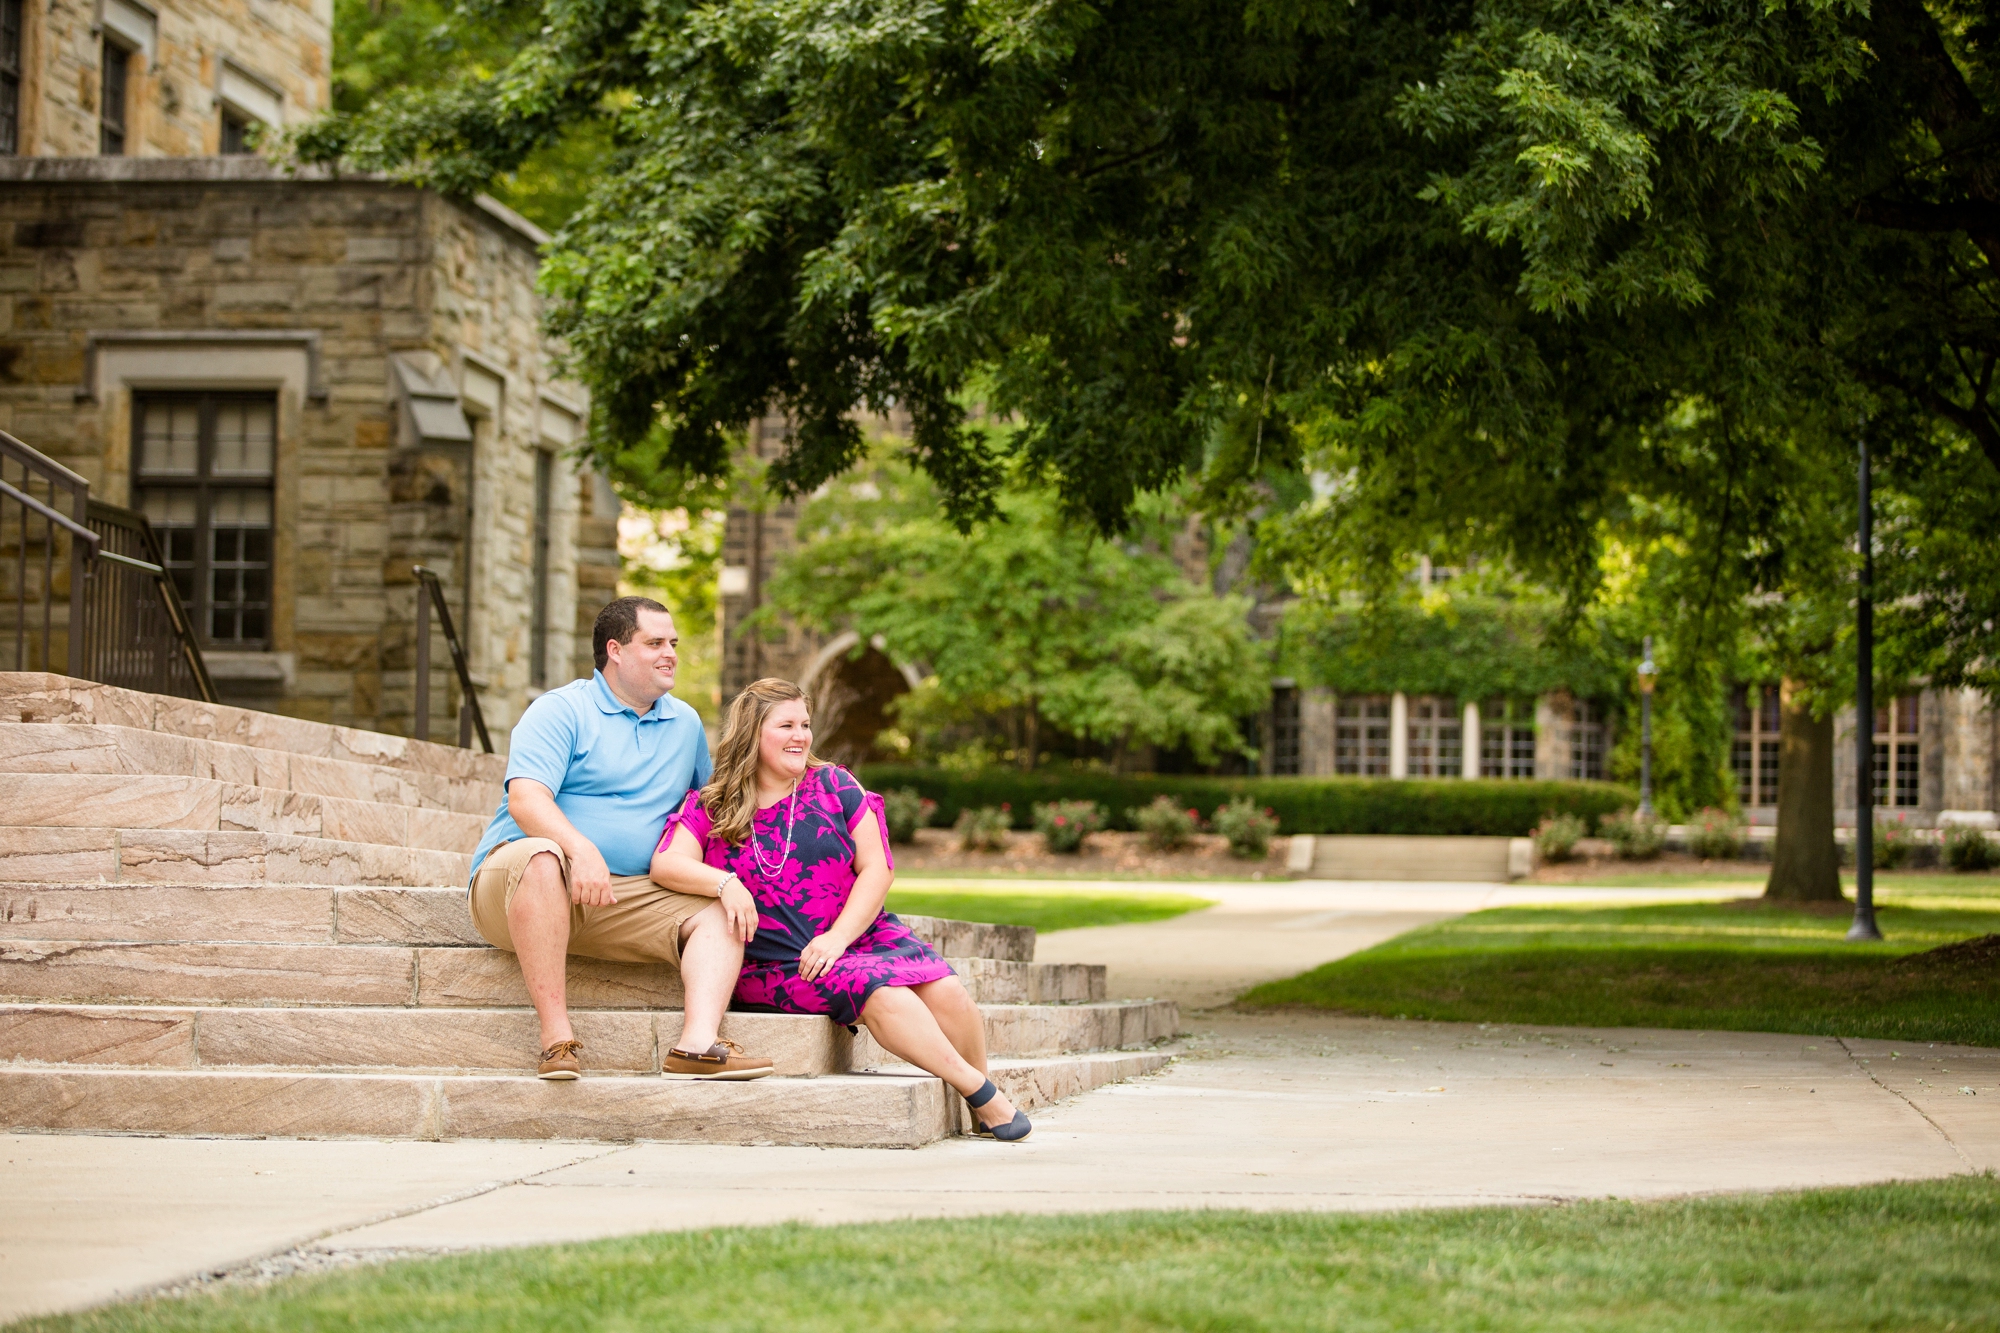 westminster college wedding pictures, westminster college wedding photos, westminster college engagement photos, westminster college engagement pictures, westminster college chapel